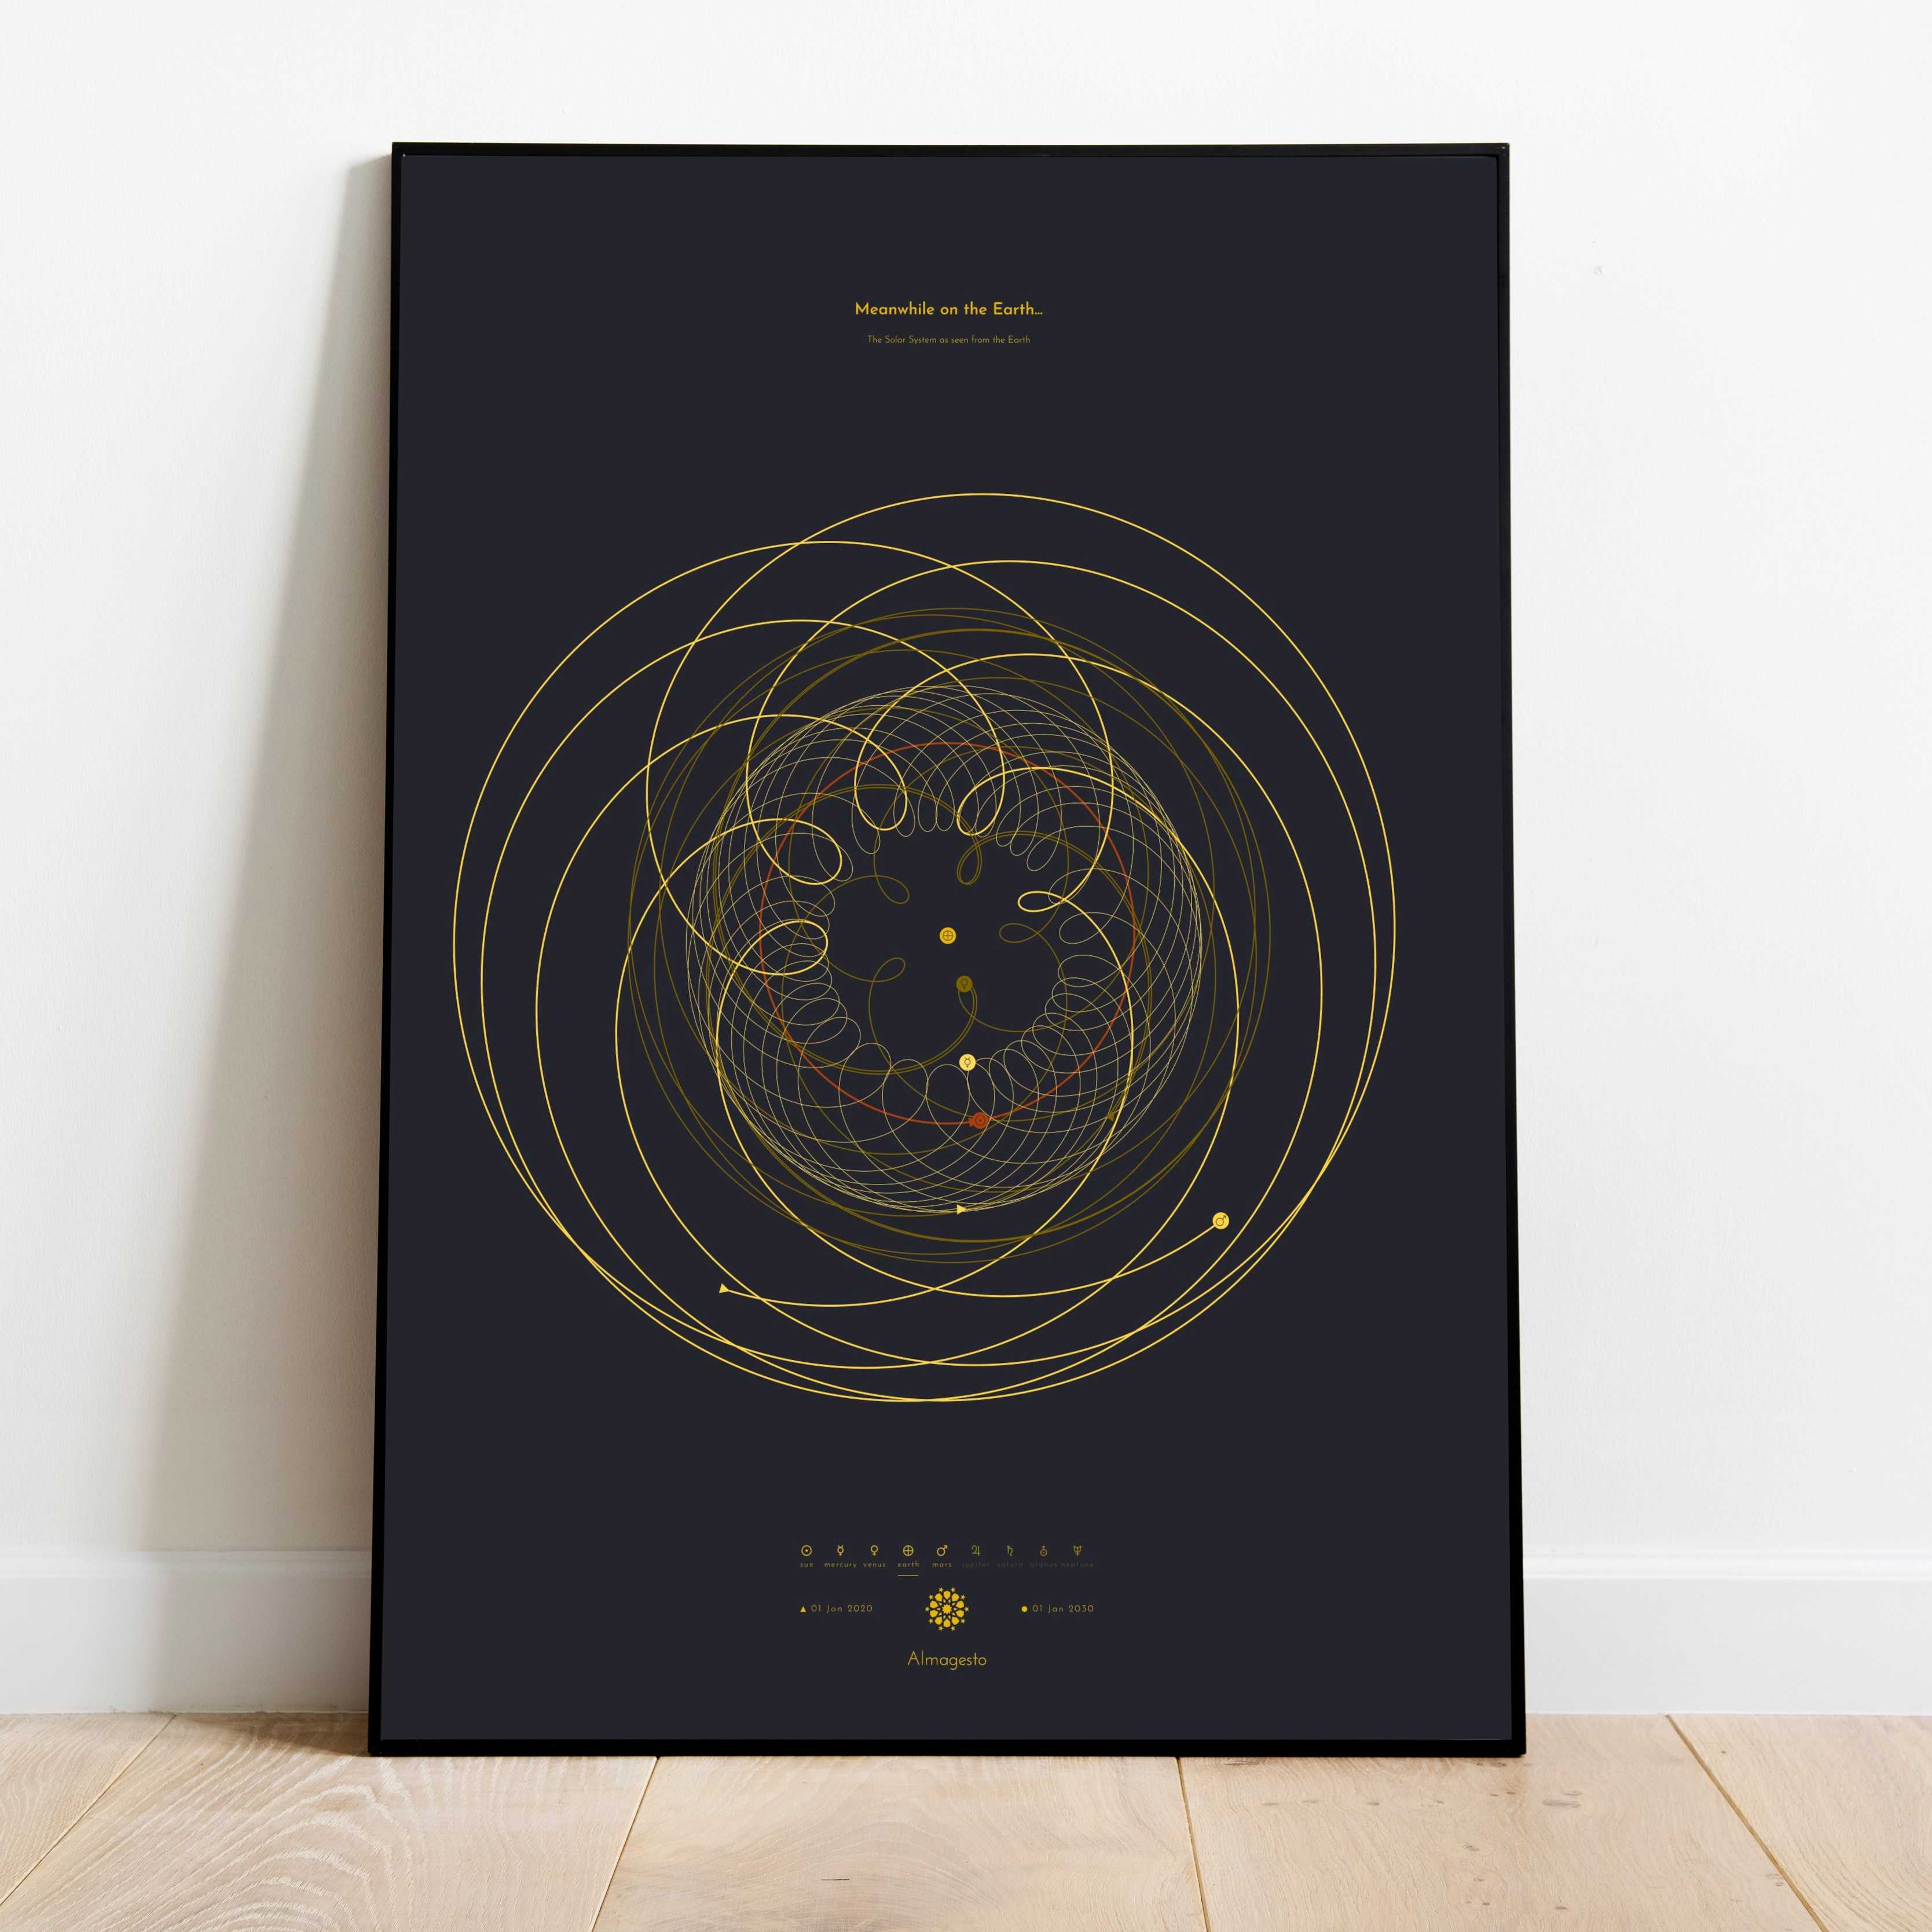 Choose your planet, your meaningful dates, and create a unique piece of astronomical wall art. The perfect gift to celebrate something special on the Earth through the planetary movements up in the sky. You can customize the reference planet, the starting and ending dates, the zoom level, the graphical theme and you can optionally add a personal message.